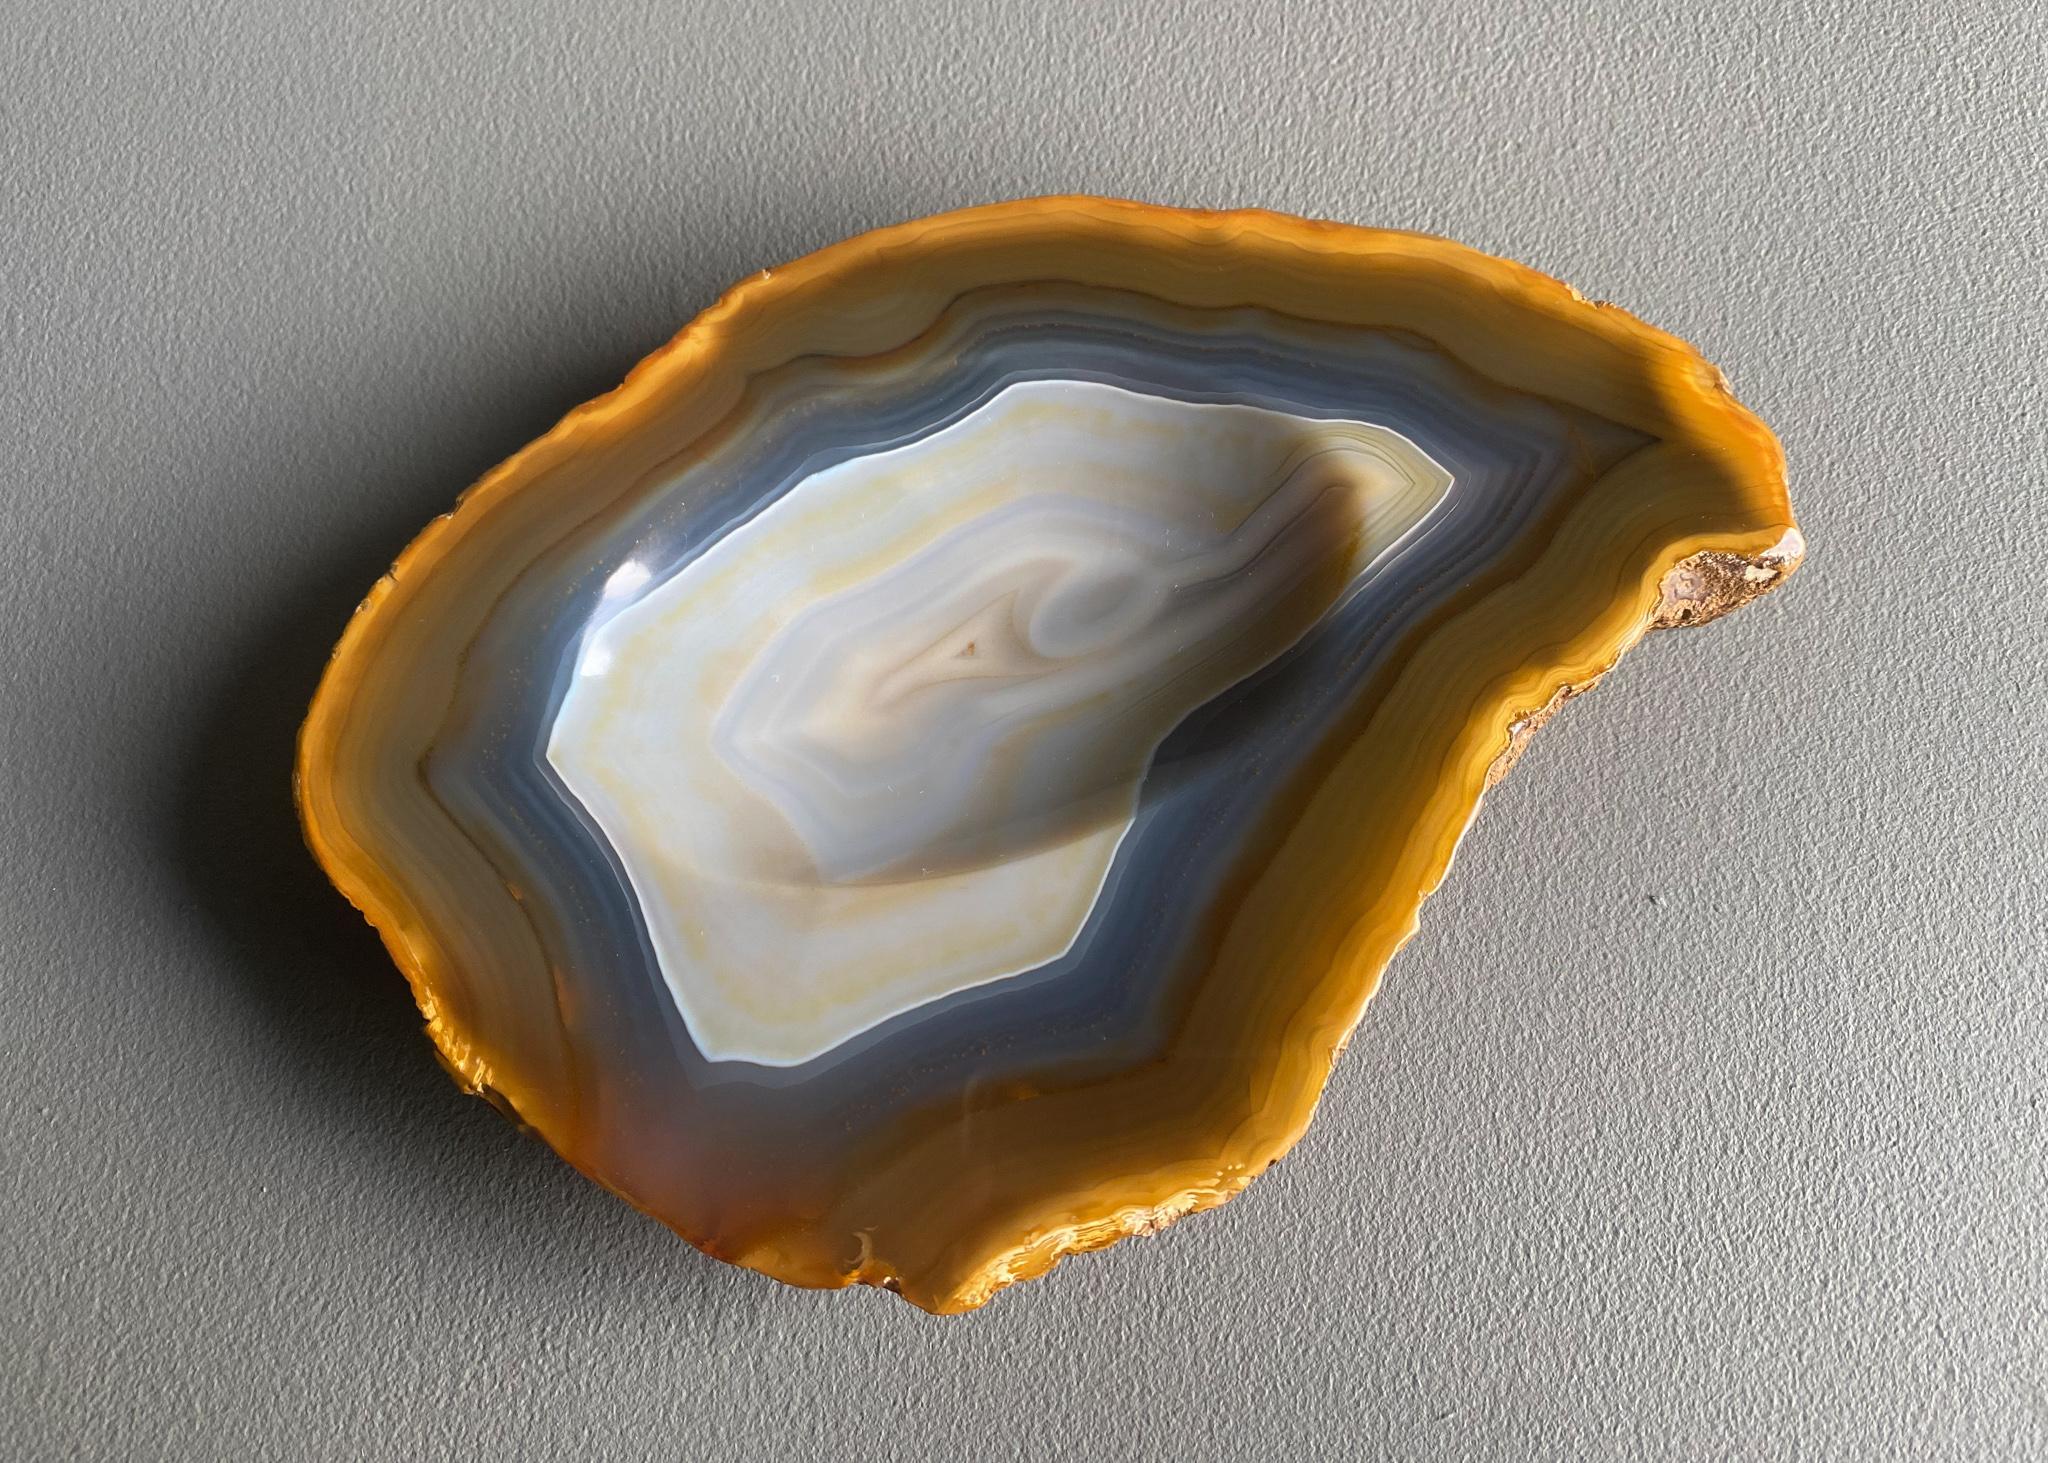 Polished Agate Geode Stone Bowl, circa 1960 For Sale 1